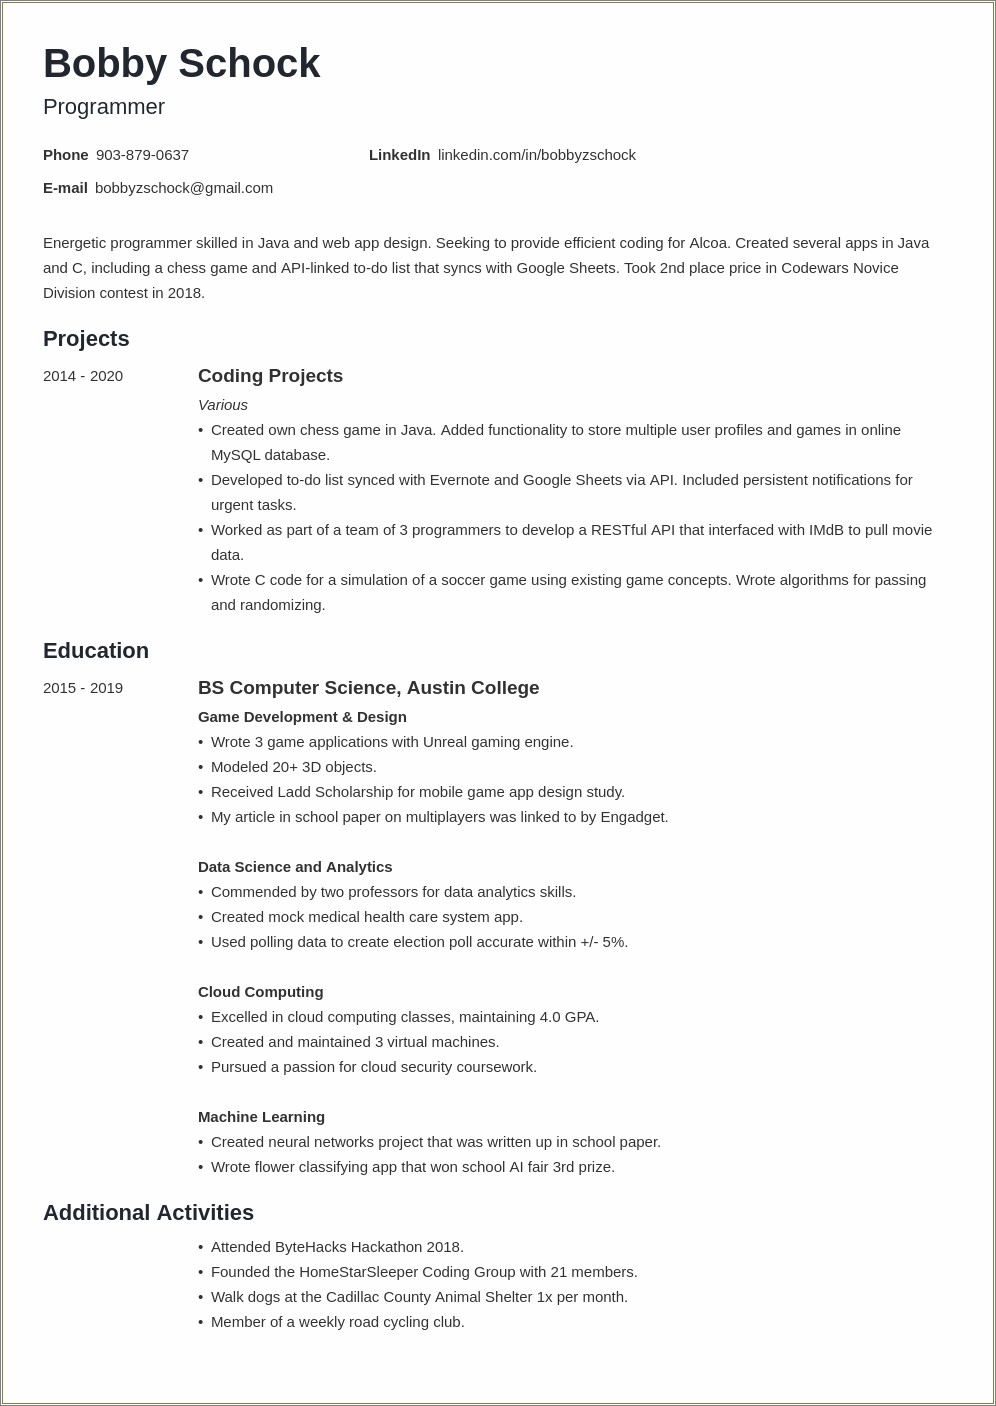 Resume Objective For Medical Coding Entry Level